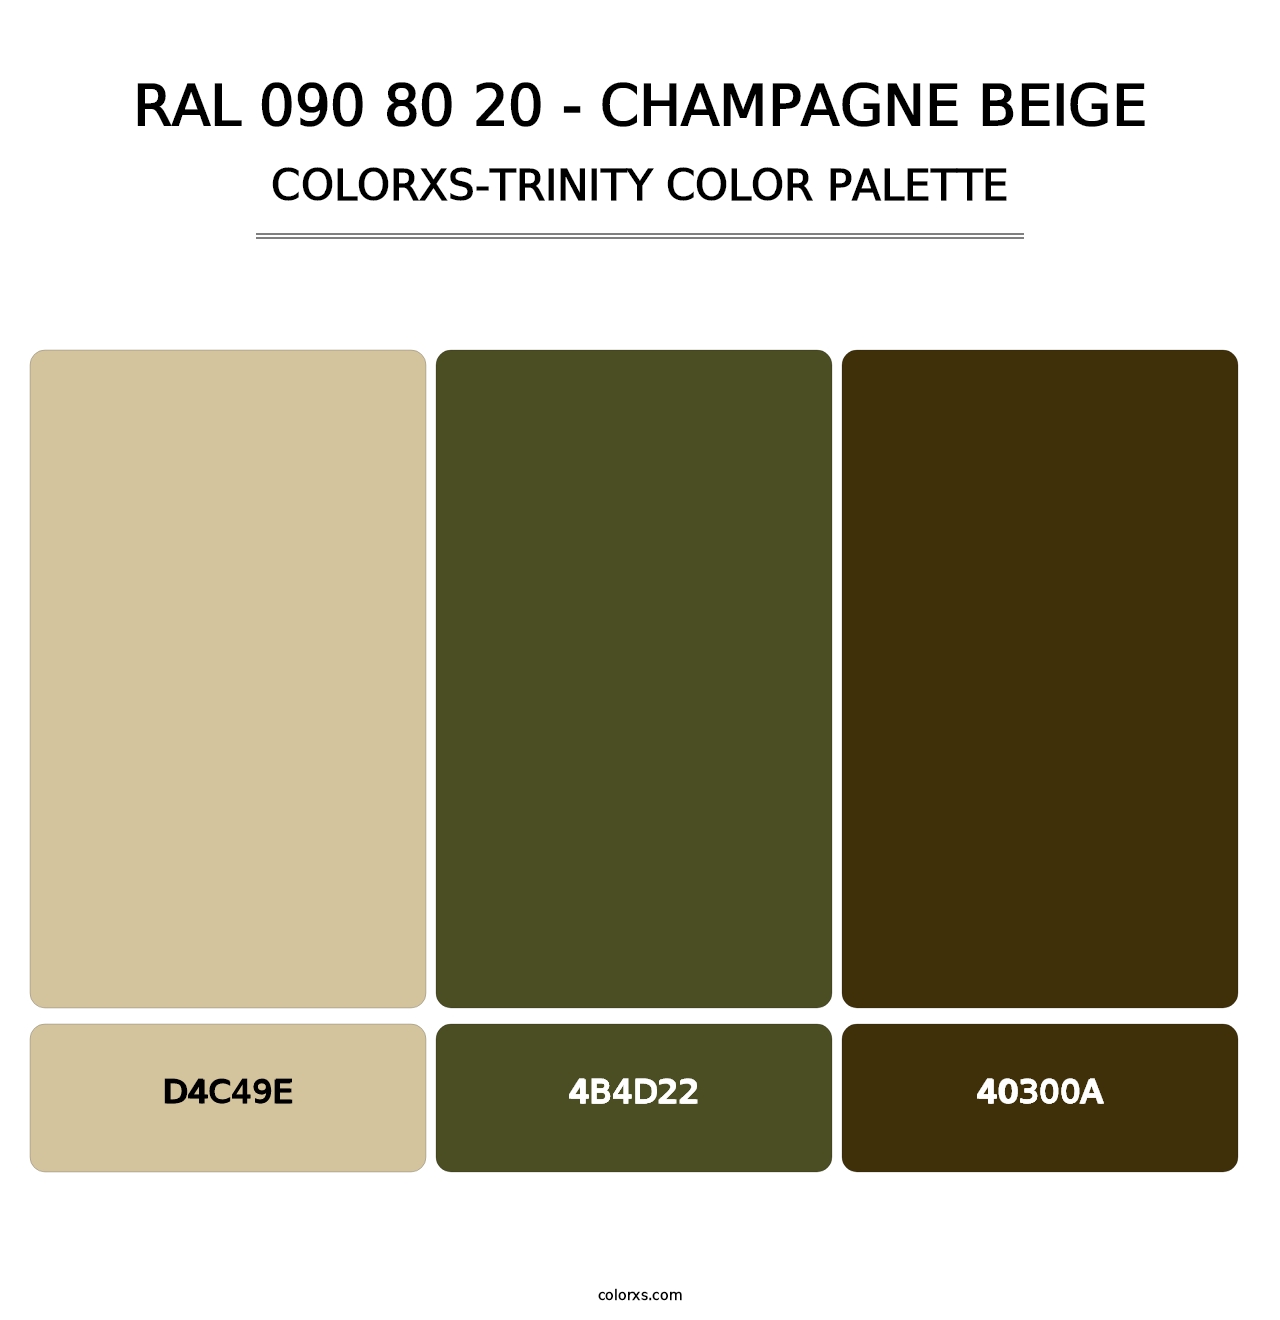 RAL 090 80 20 - Champagne Beige - Colorxs Trinity Palette